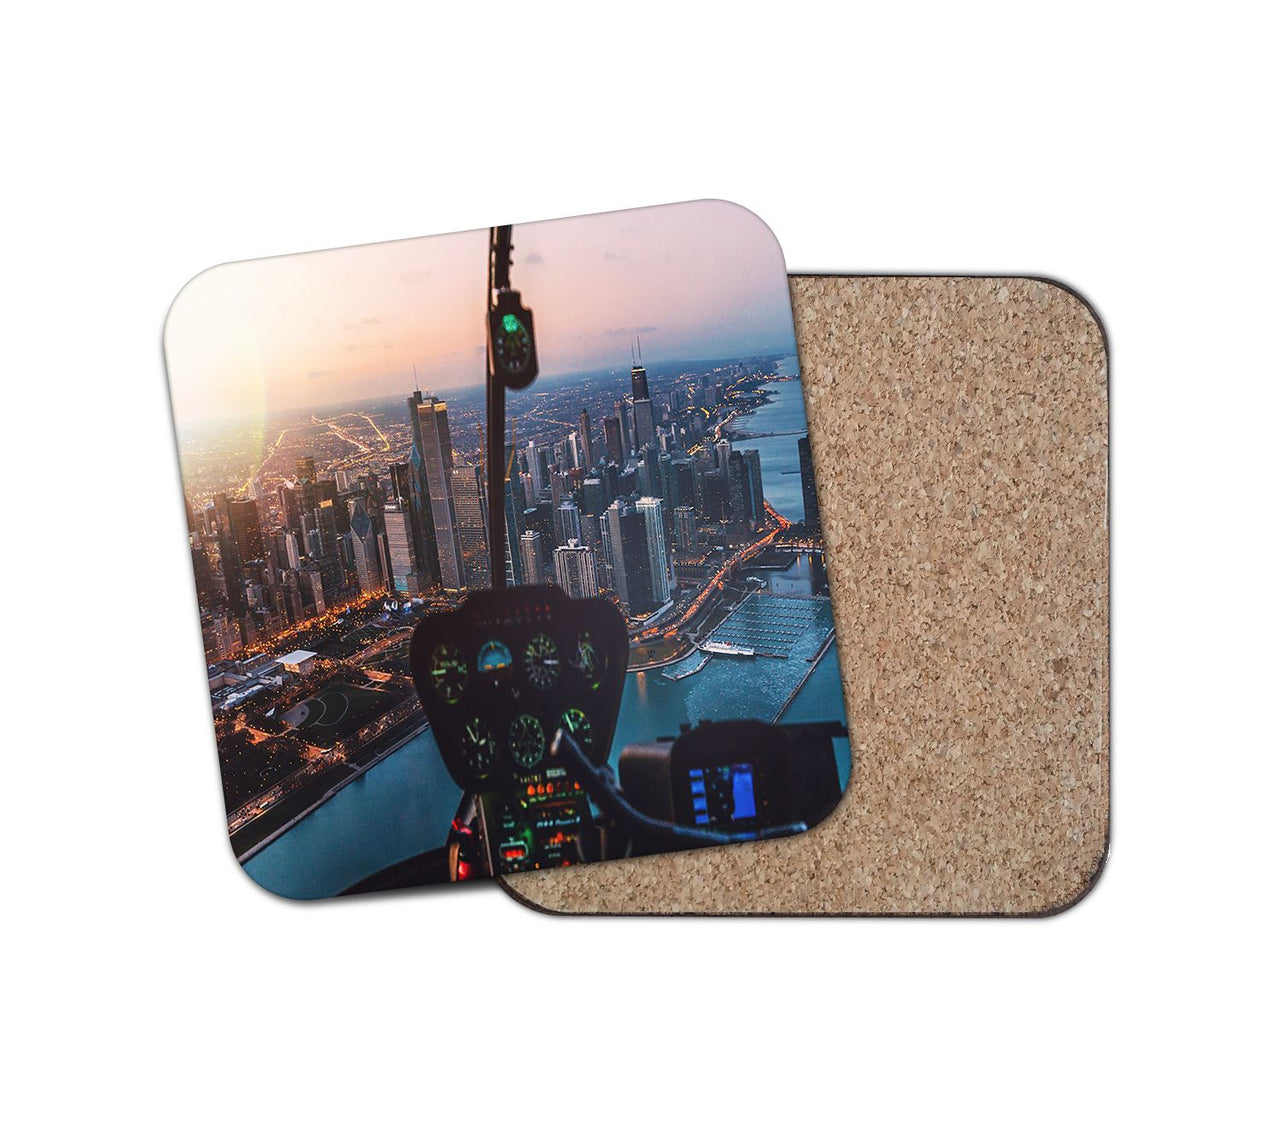 Amazing City View from Helicopter Cockpit Designed Coasters